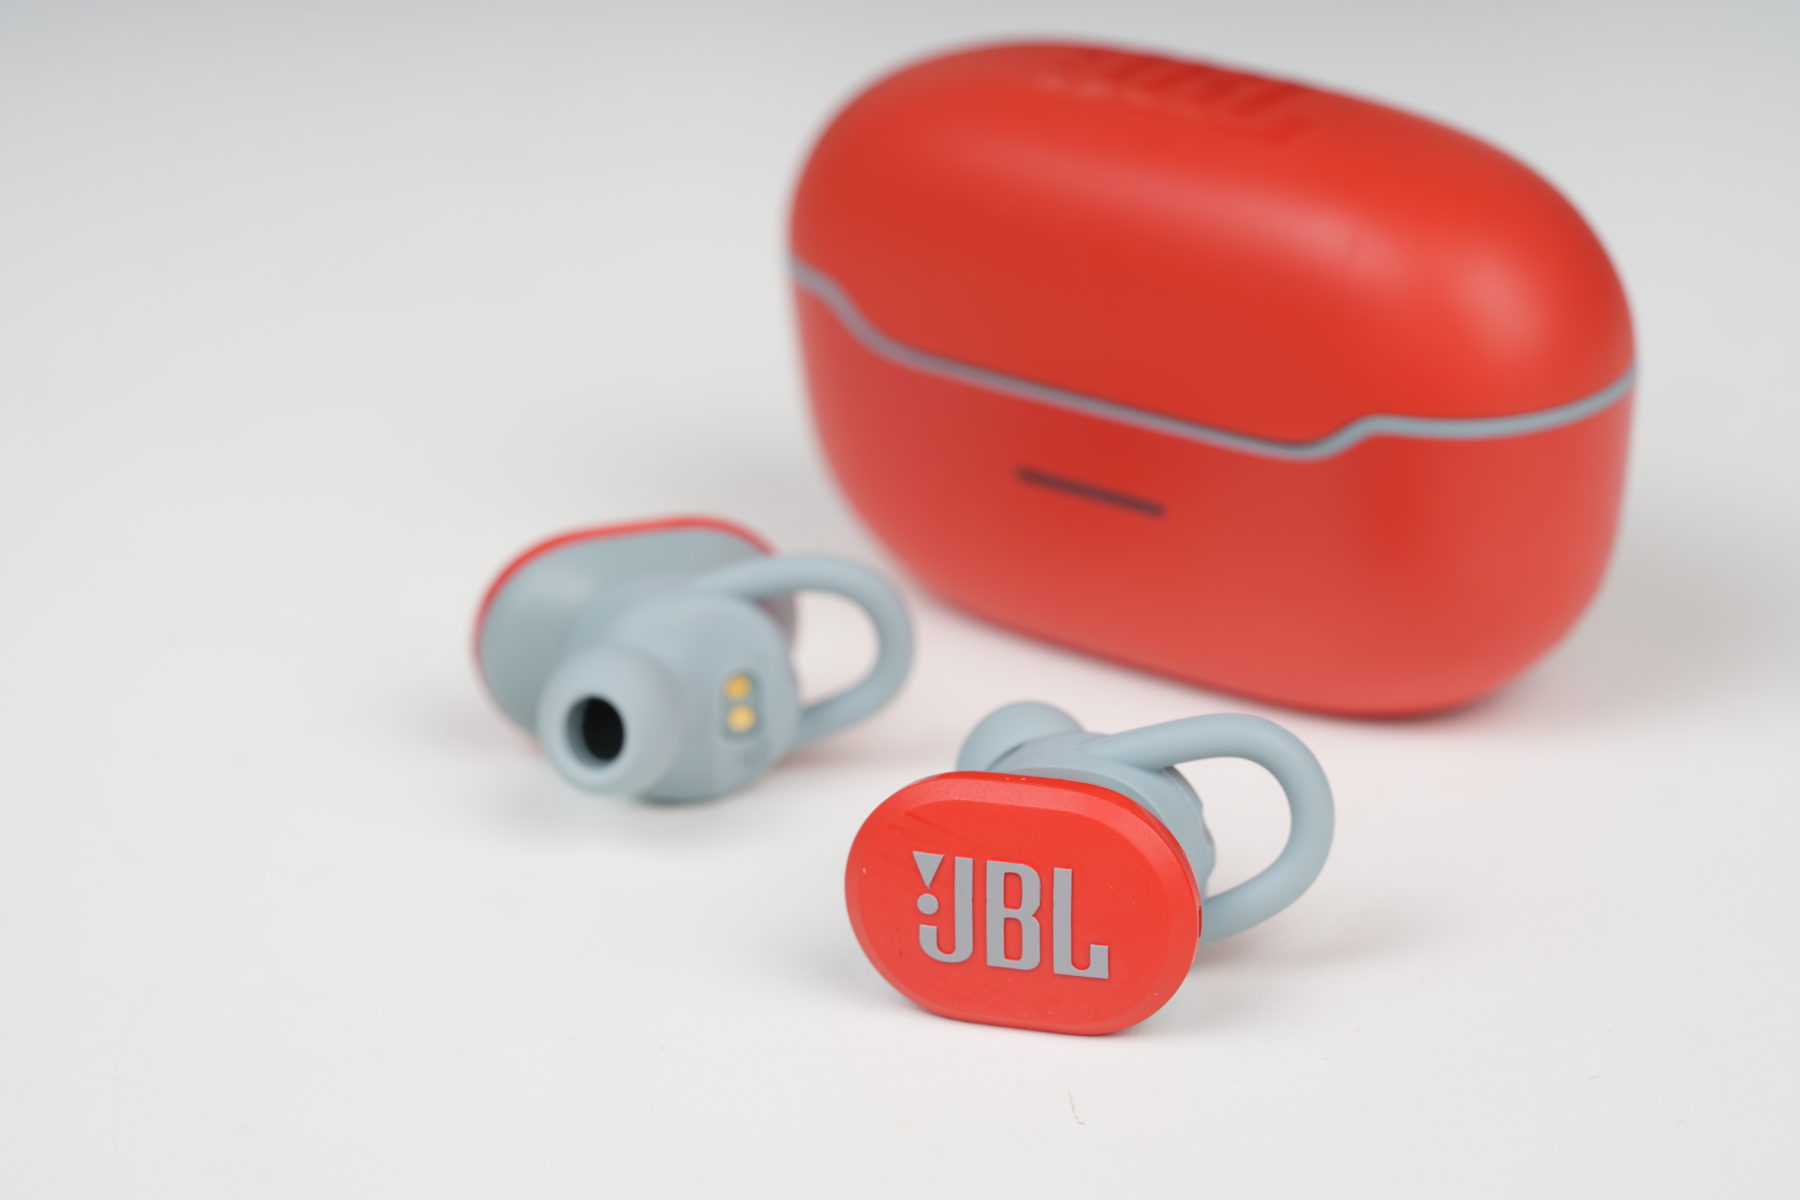 Jbl Philippines Showcases New Tws Ear Buds With Anc, New Partybox And New Streaming Mic